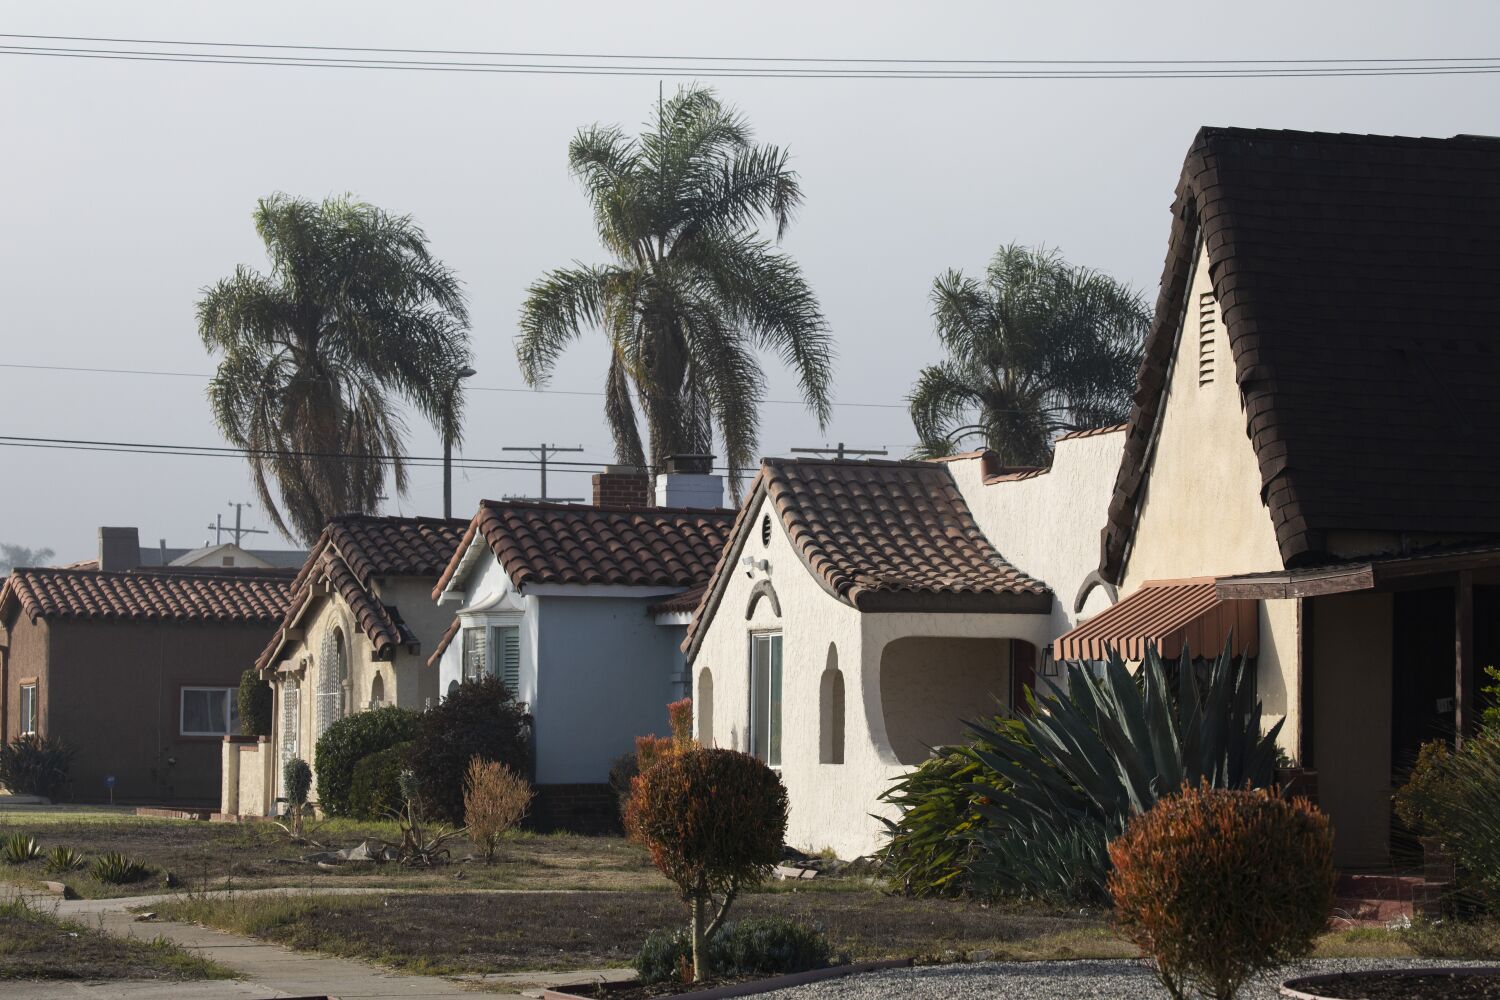 California duplex law not yet working as expected